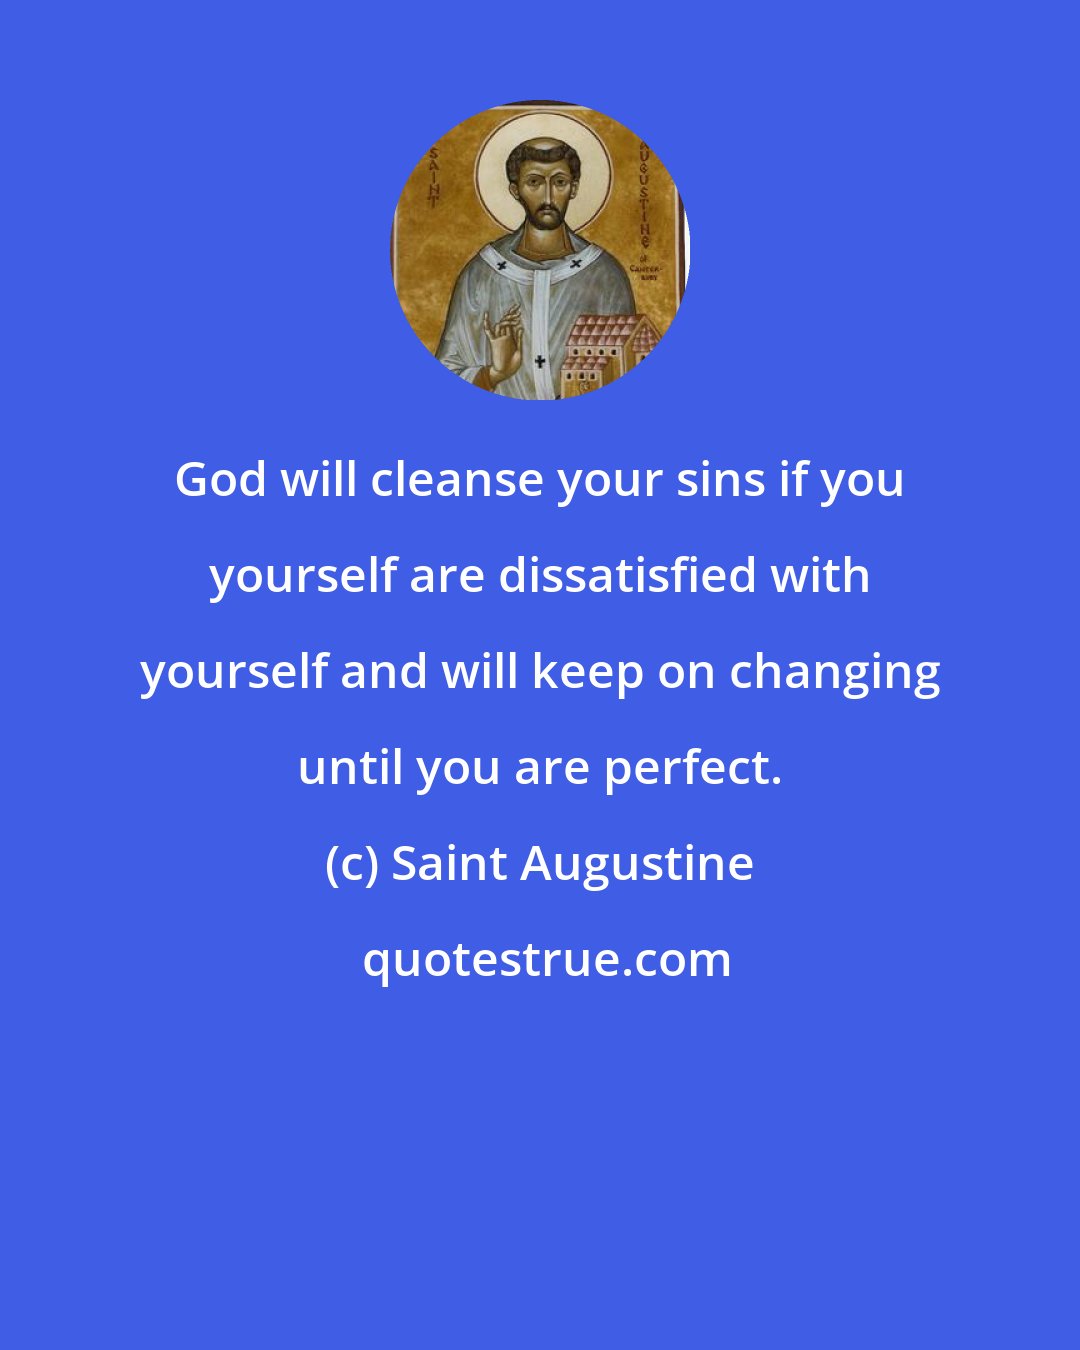 Saint Augustine: God will cleanse your sins if you yourself are dissatisfied with yourself and will keep on changing until you are perfect.